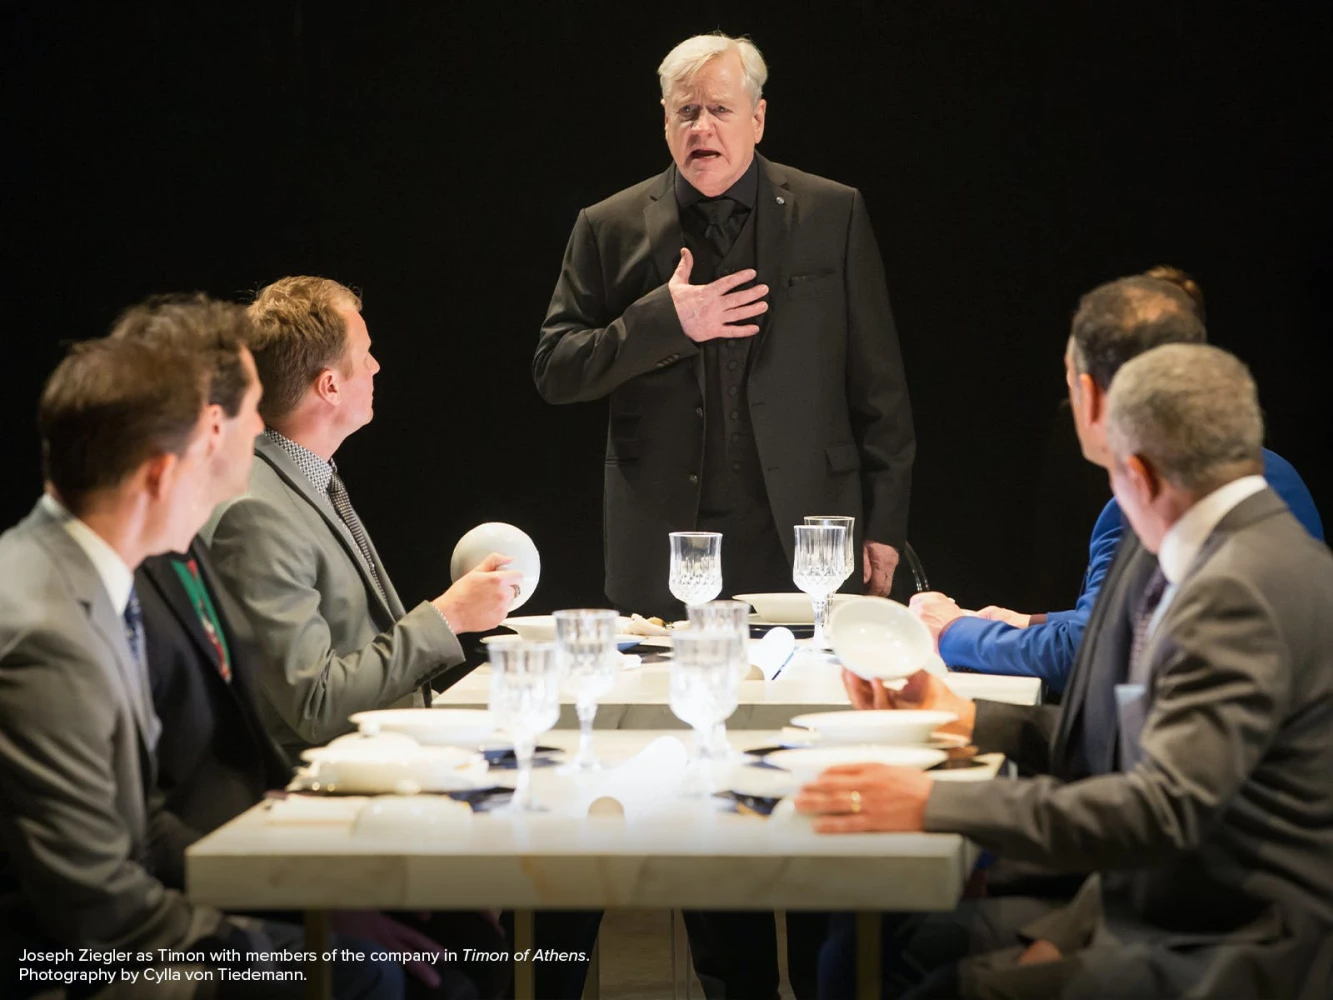 Timon of Athens: What to expect - 3